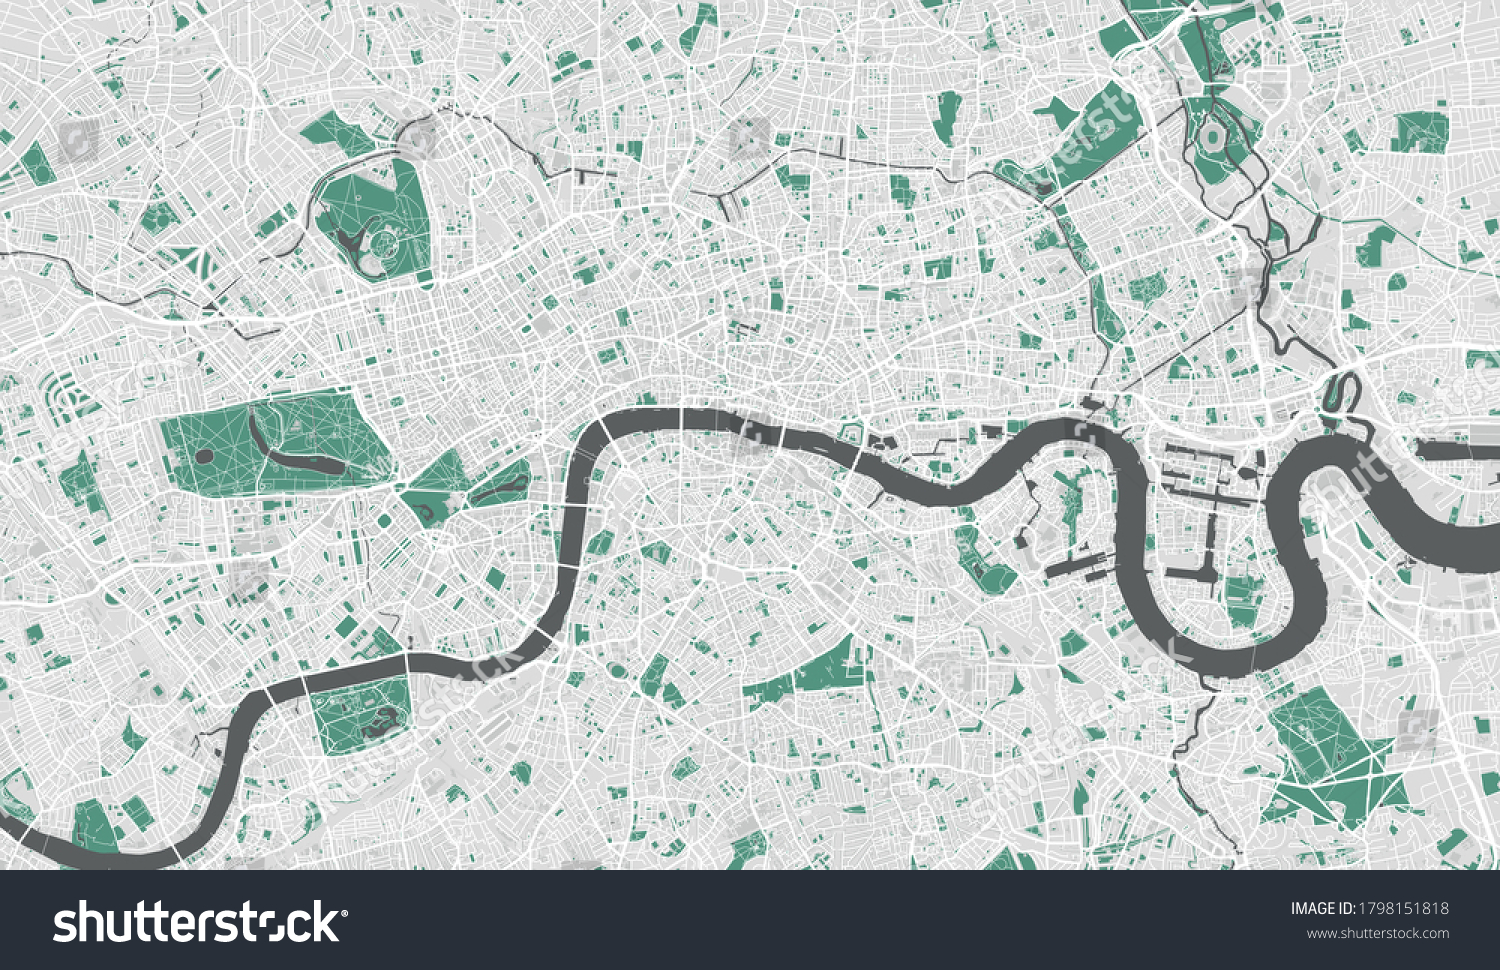 Highly detailed map of London, UK #1798151818